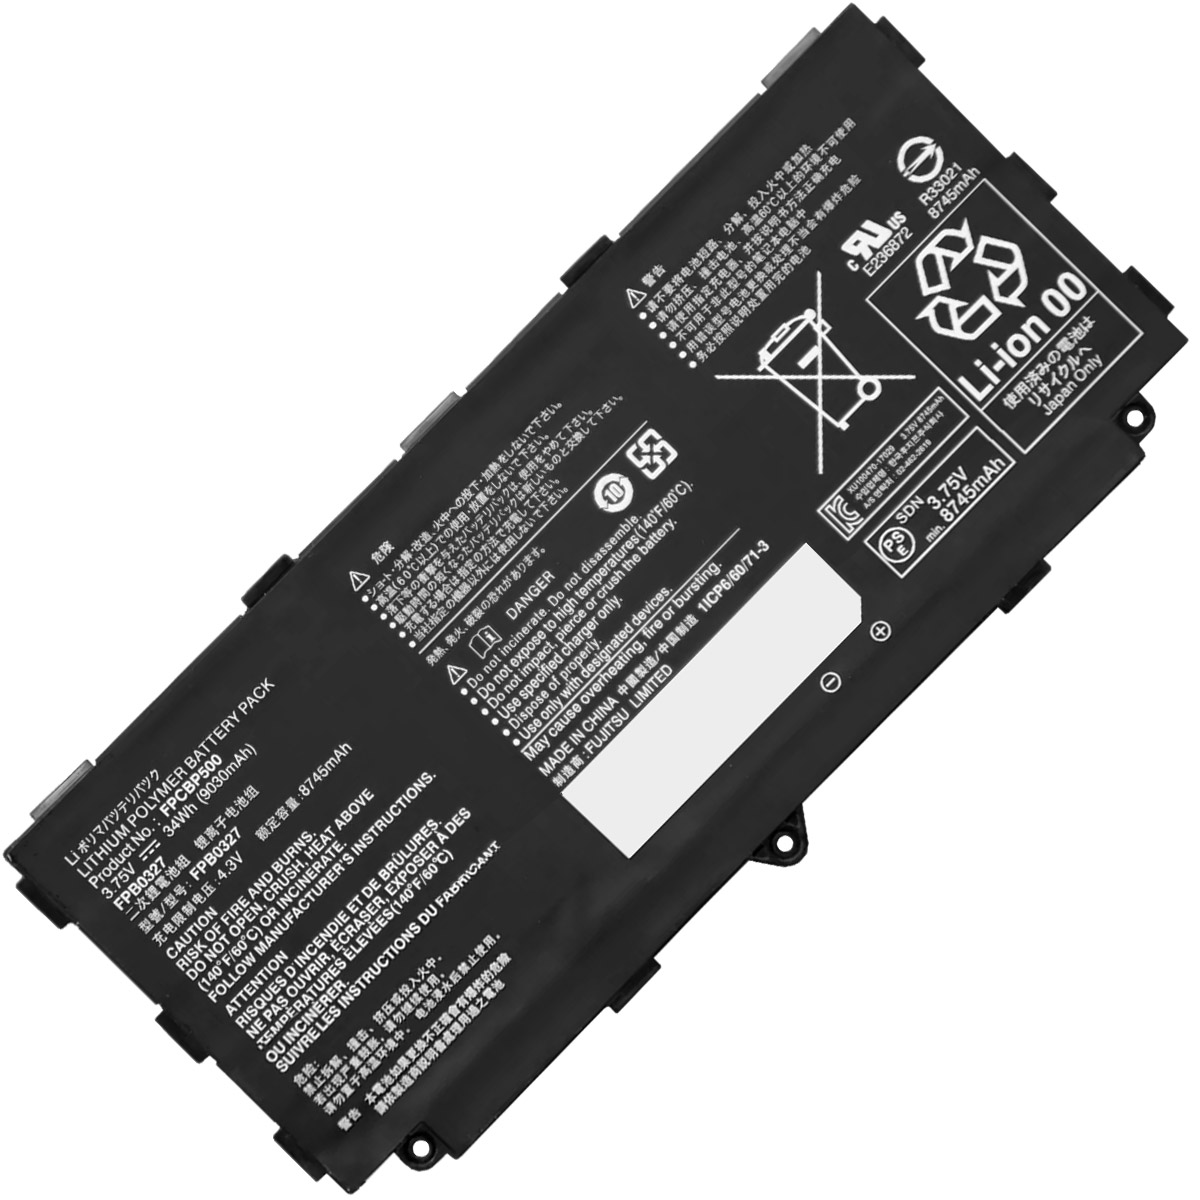 FUJITSU Uniwill-FPCBP500/FPB0327-Laptop Replacement Battery